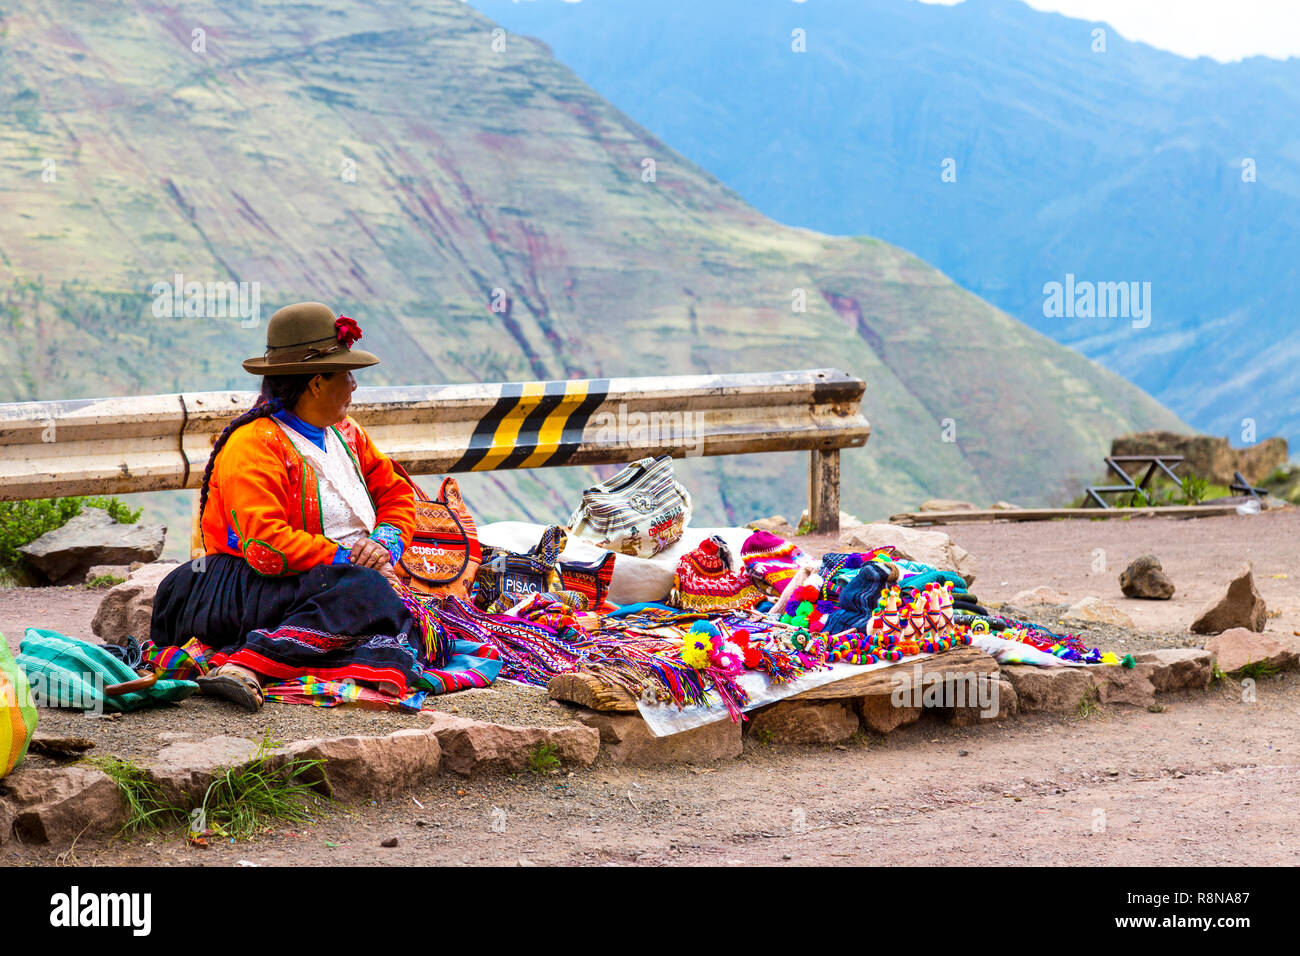 Peruvian woman sitting on the ground selling souvenirs at Pisac, Sacred Valley, Peru Stock Photo